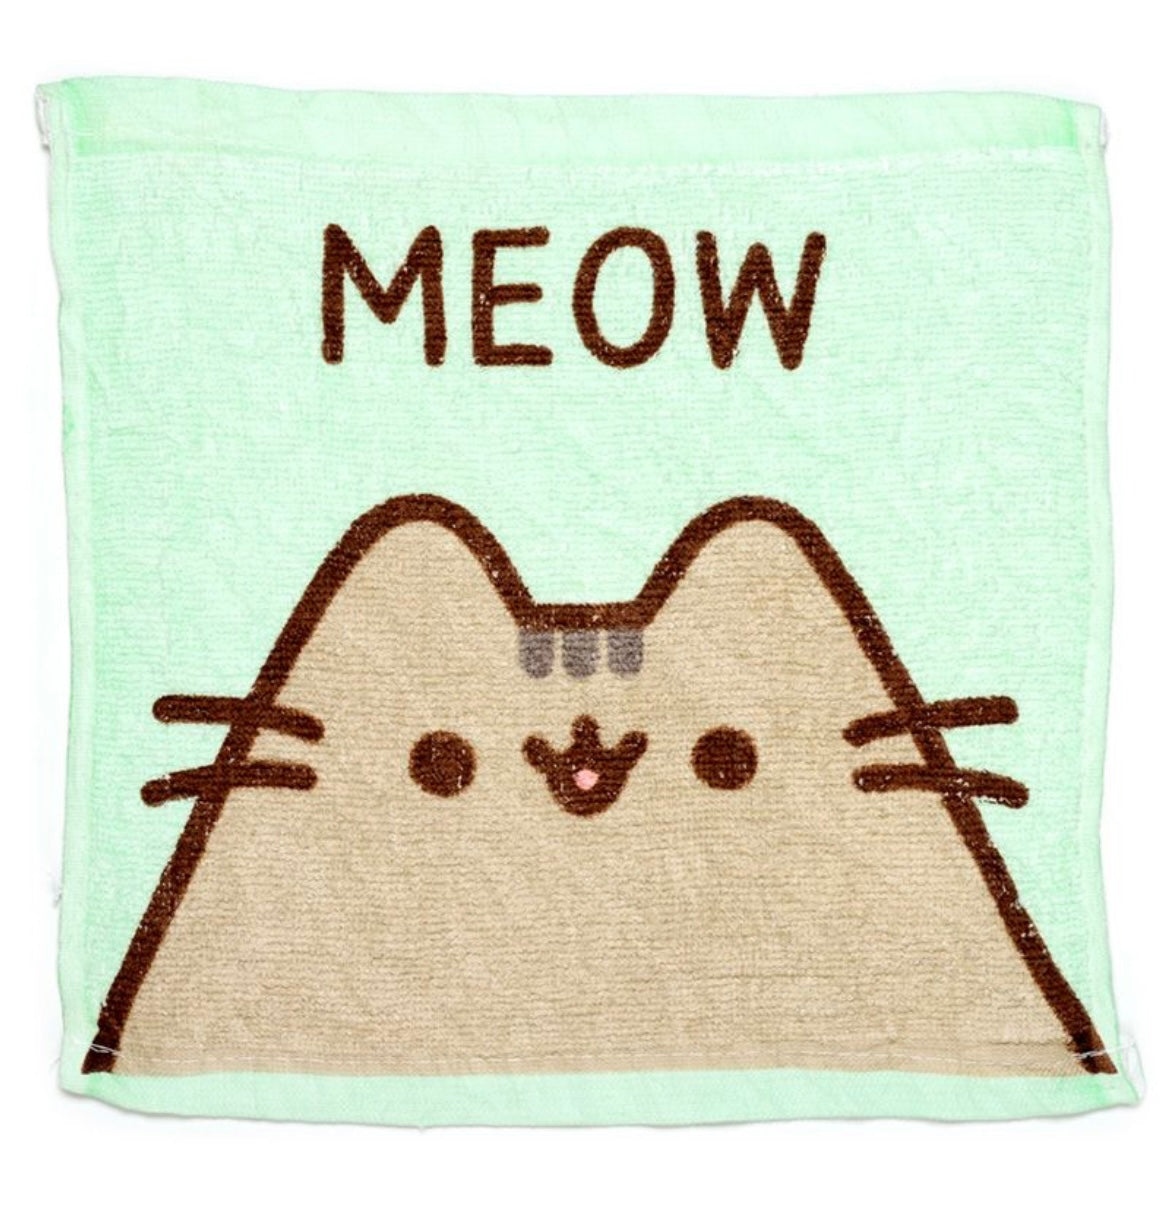 Pusheen the Cat Compressed Travel Towel